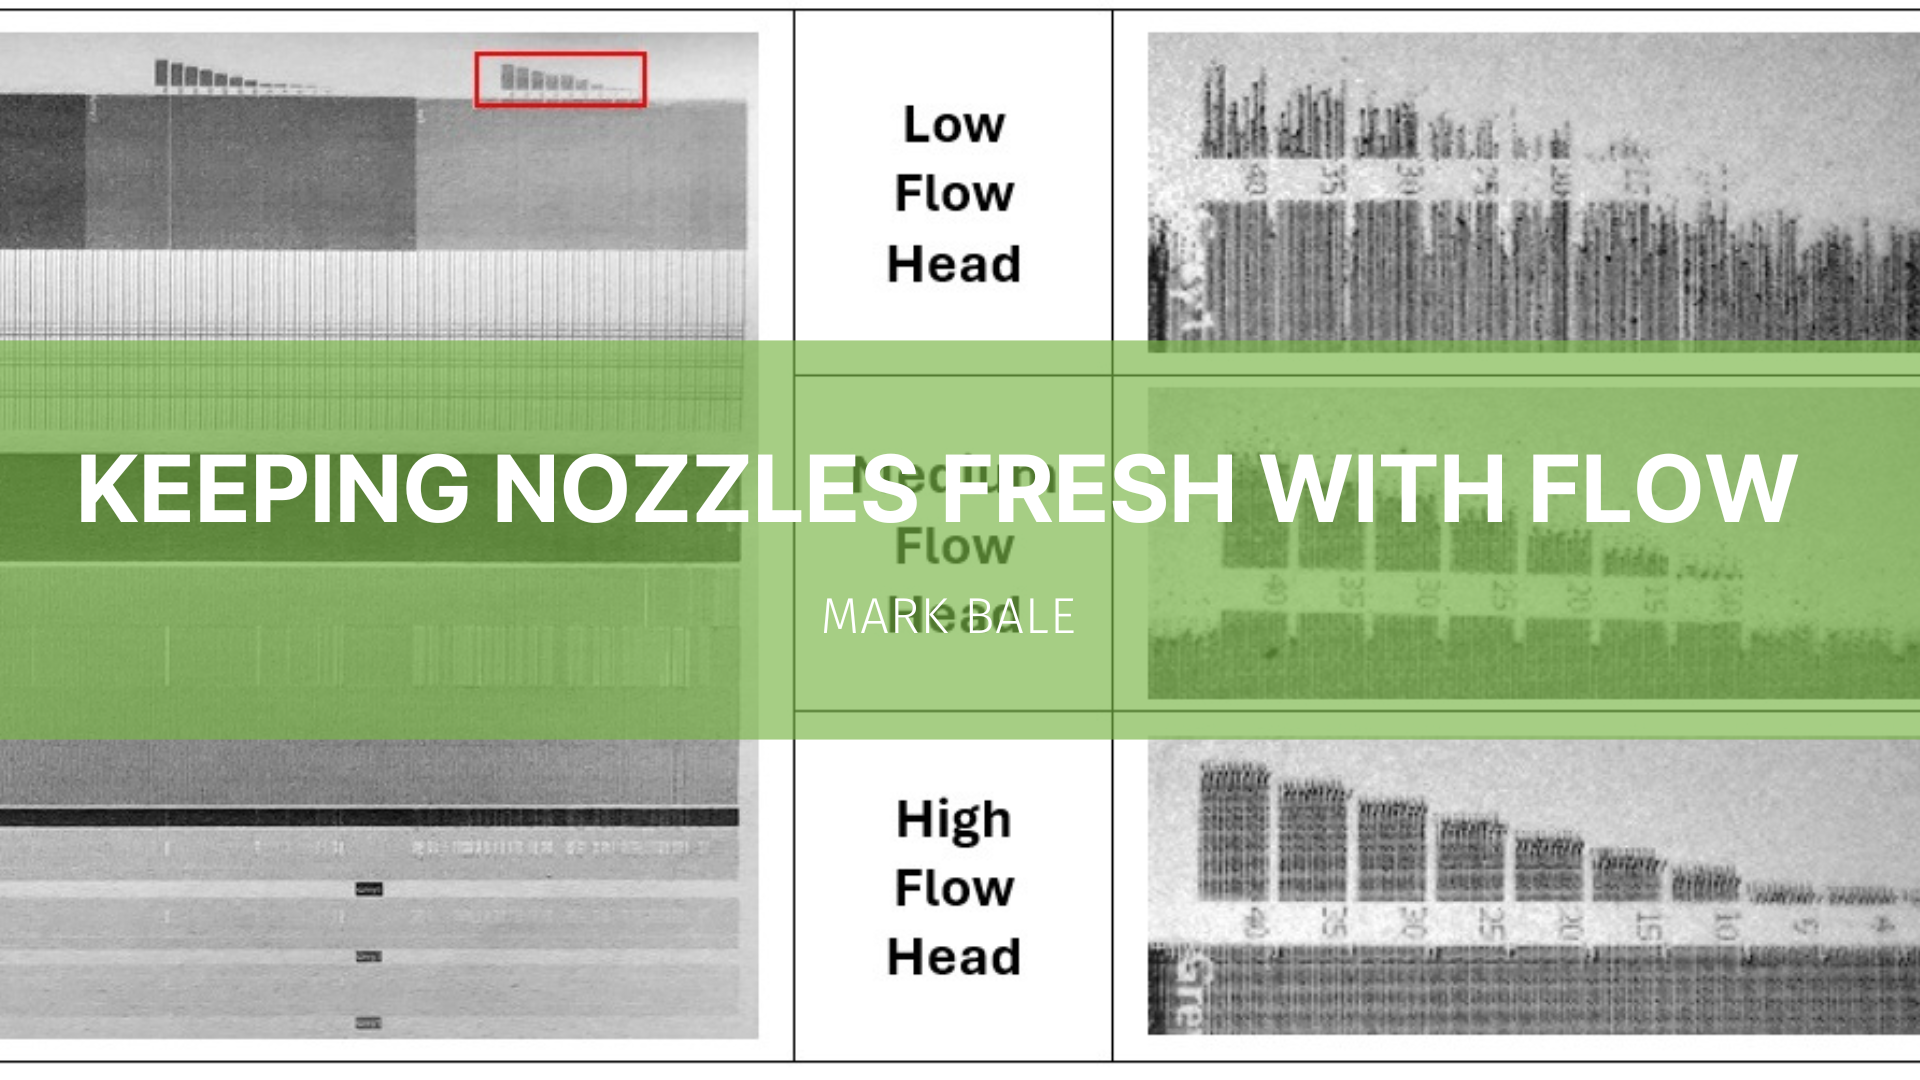 Featured image for “Keeping Nozzles Fresh with Flow”